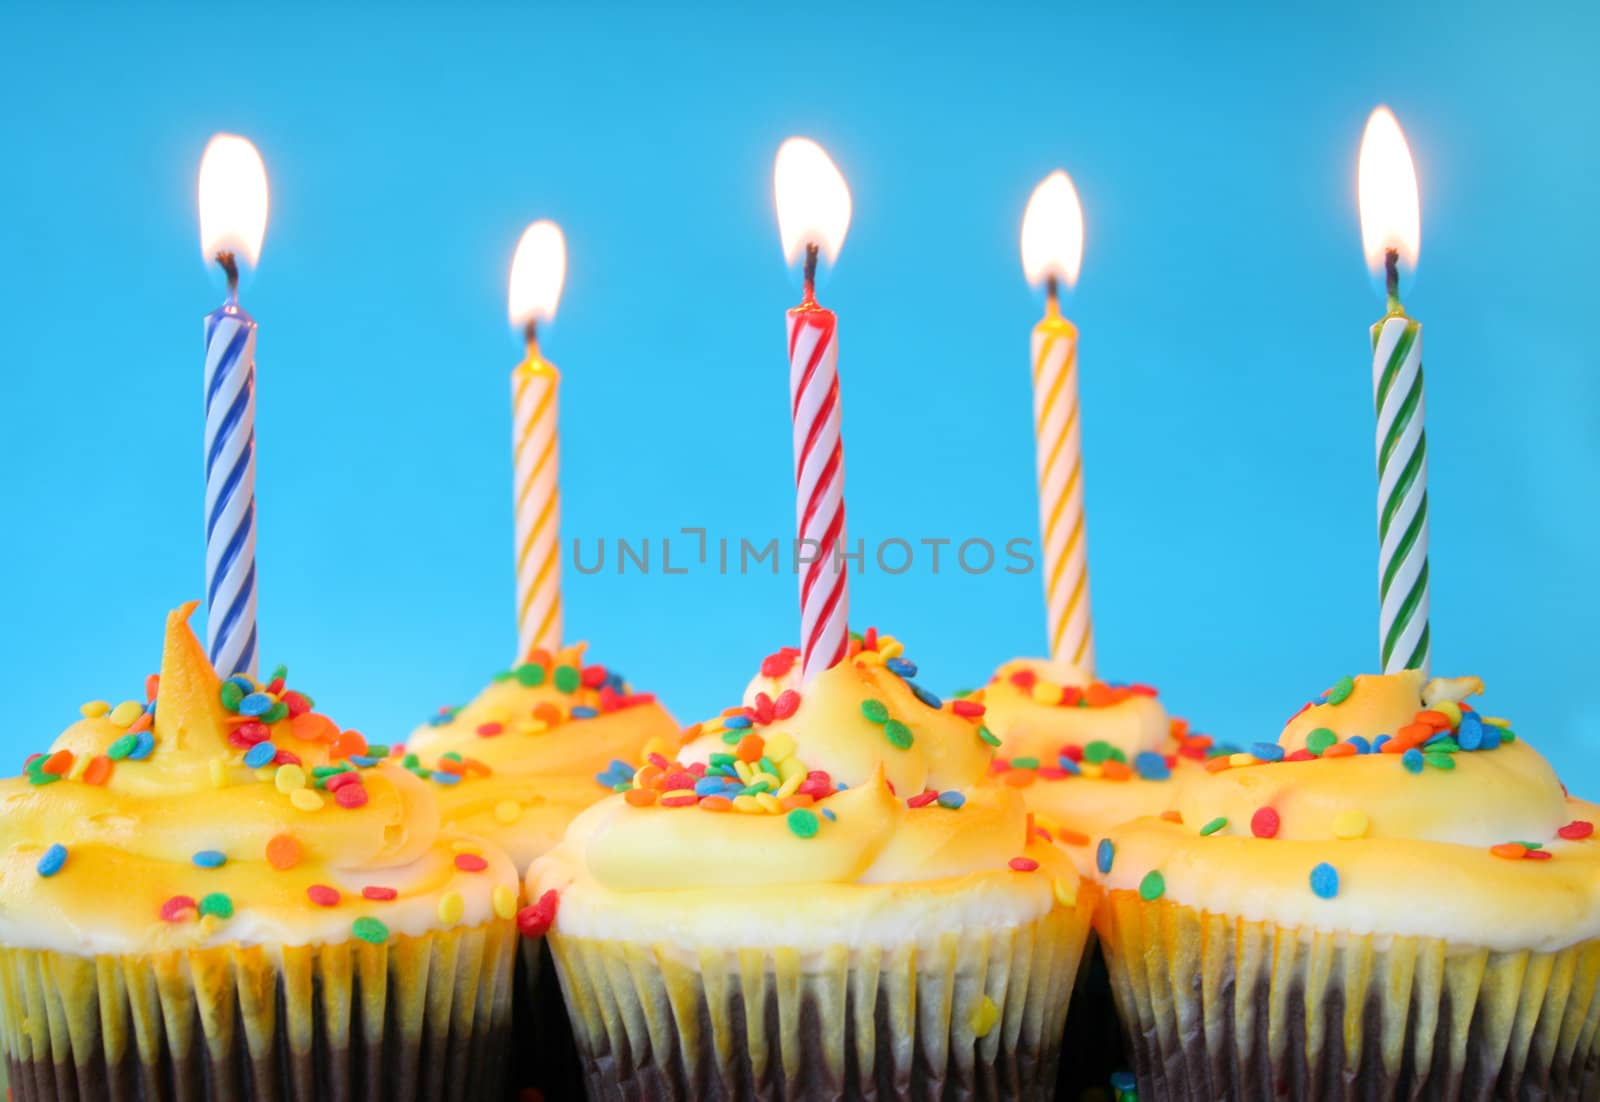 A group of cupcakes with burning candles on a blue background.